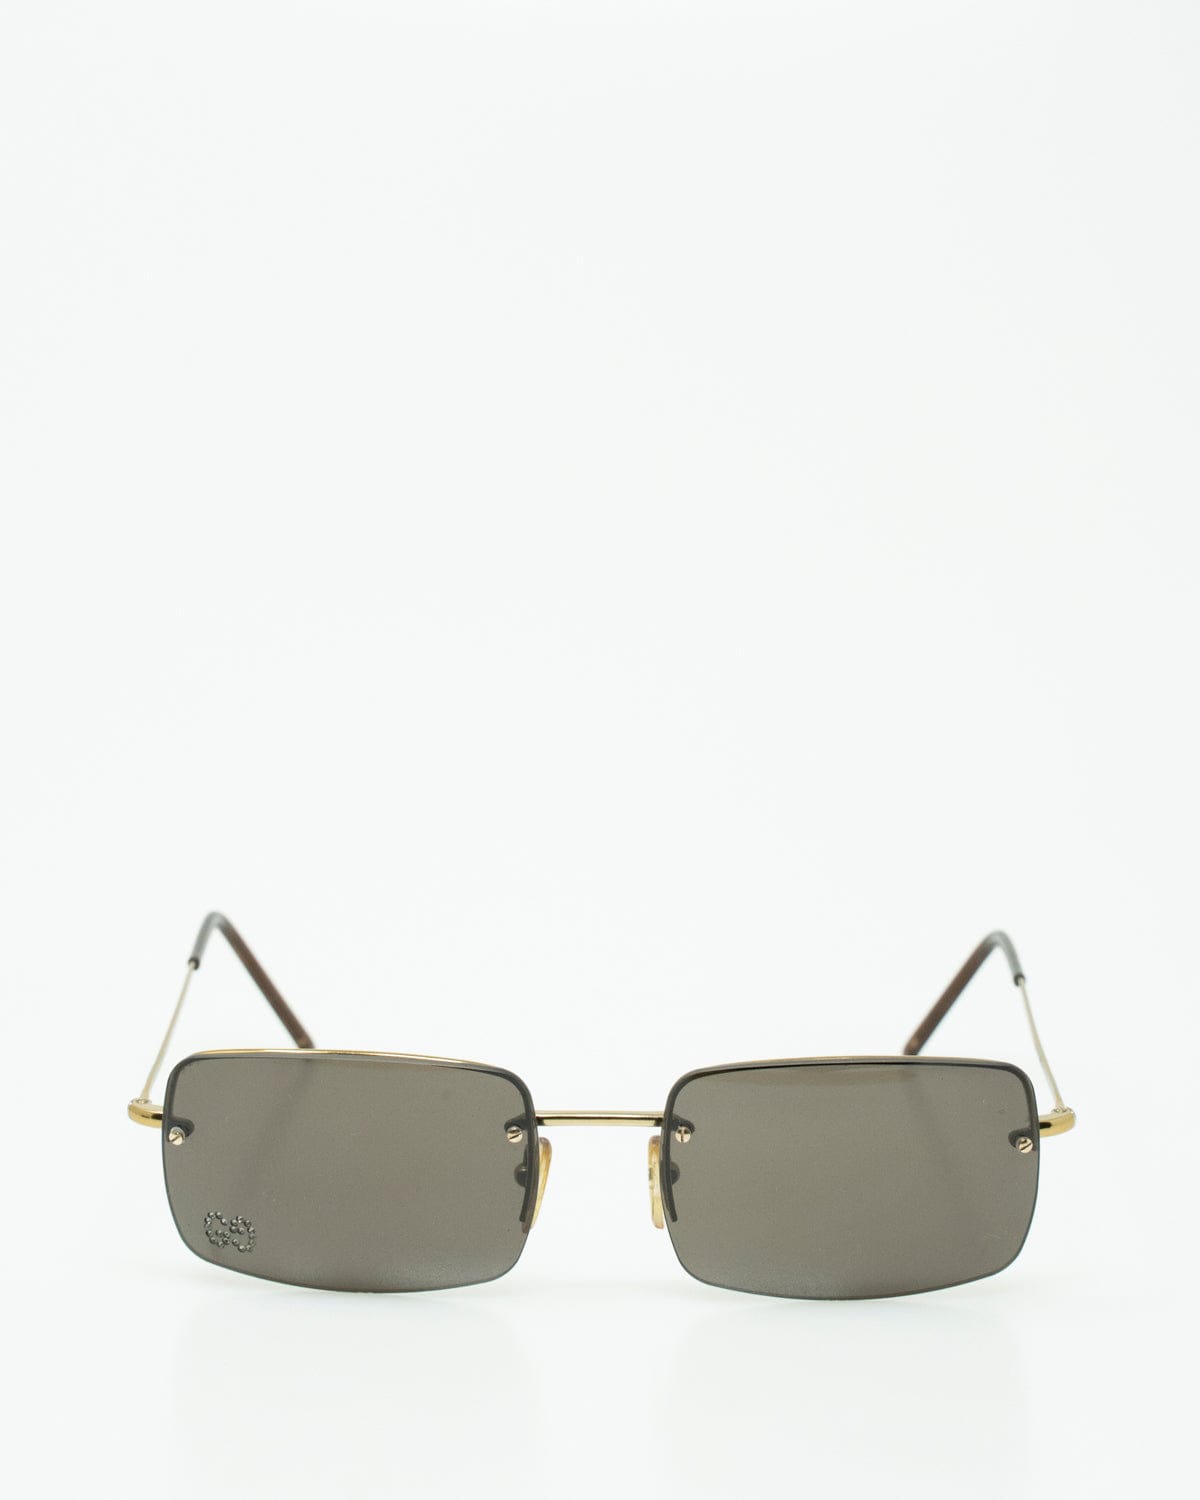 Gucci Gucci 90's Sunglasses with crystal details - AGL1194